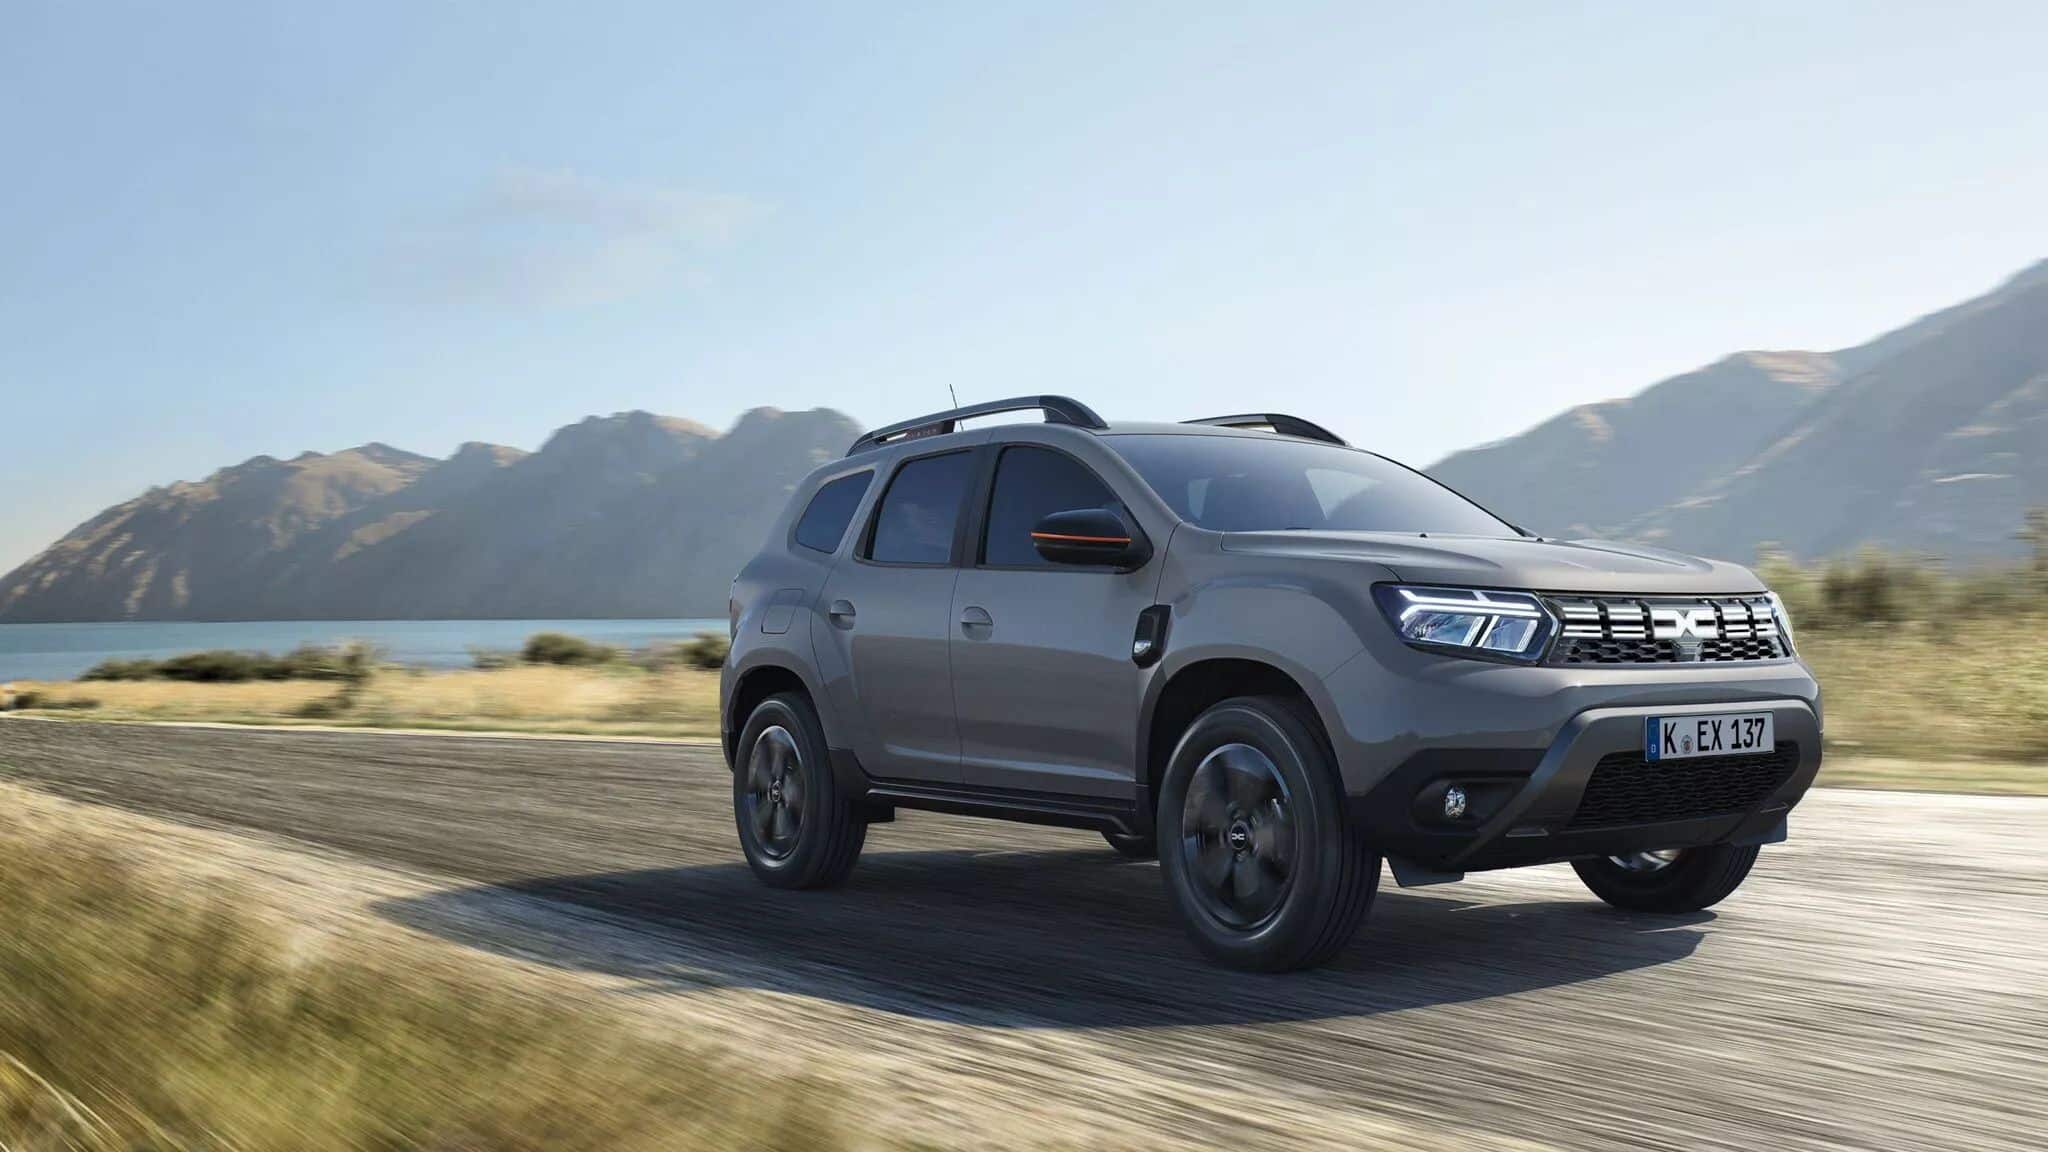 Dacia launches the Duster as a special model